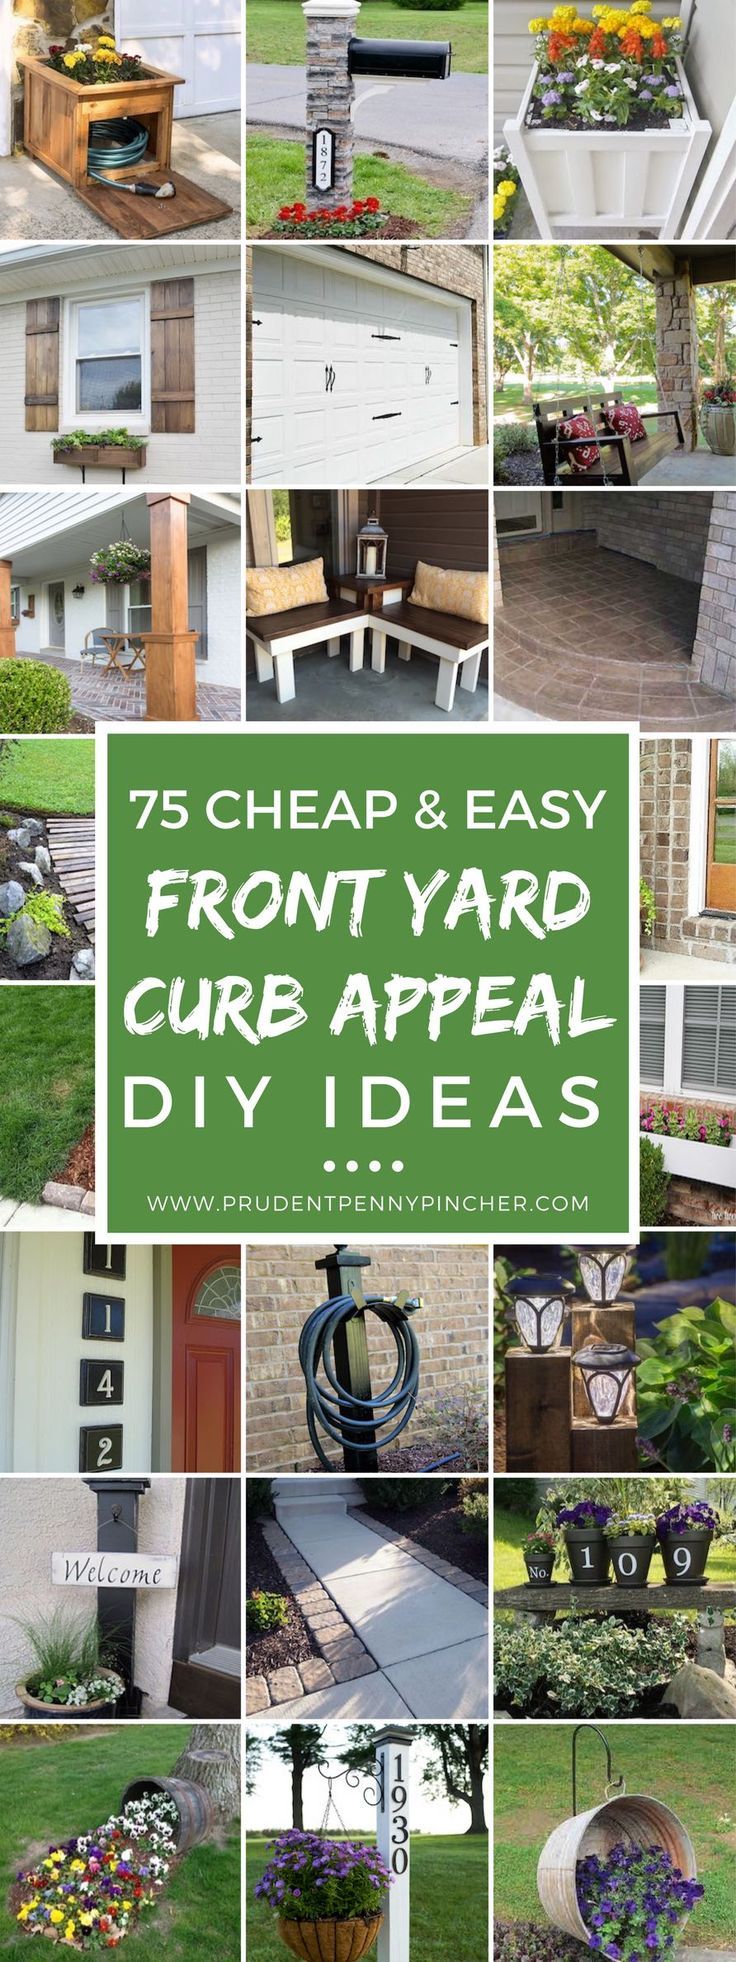 75 Cheap and Easy Front Yard Curb Appeal Ideas